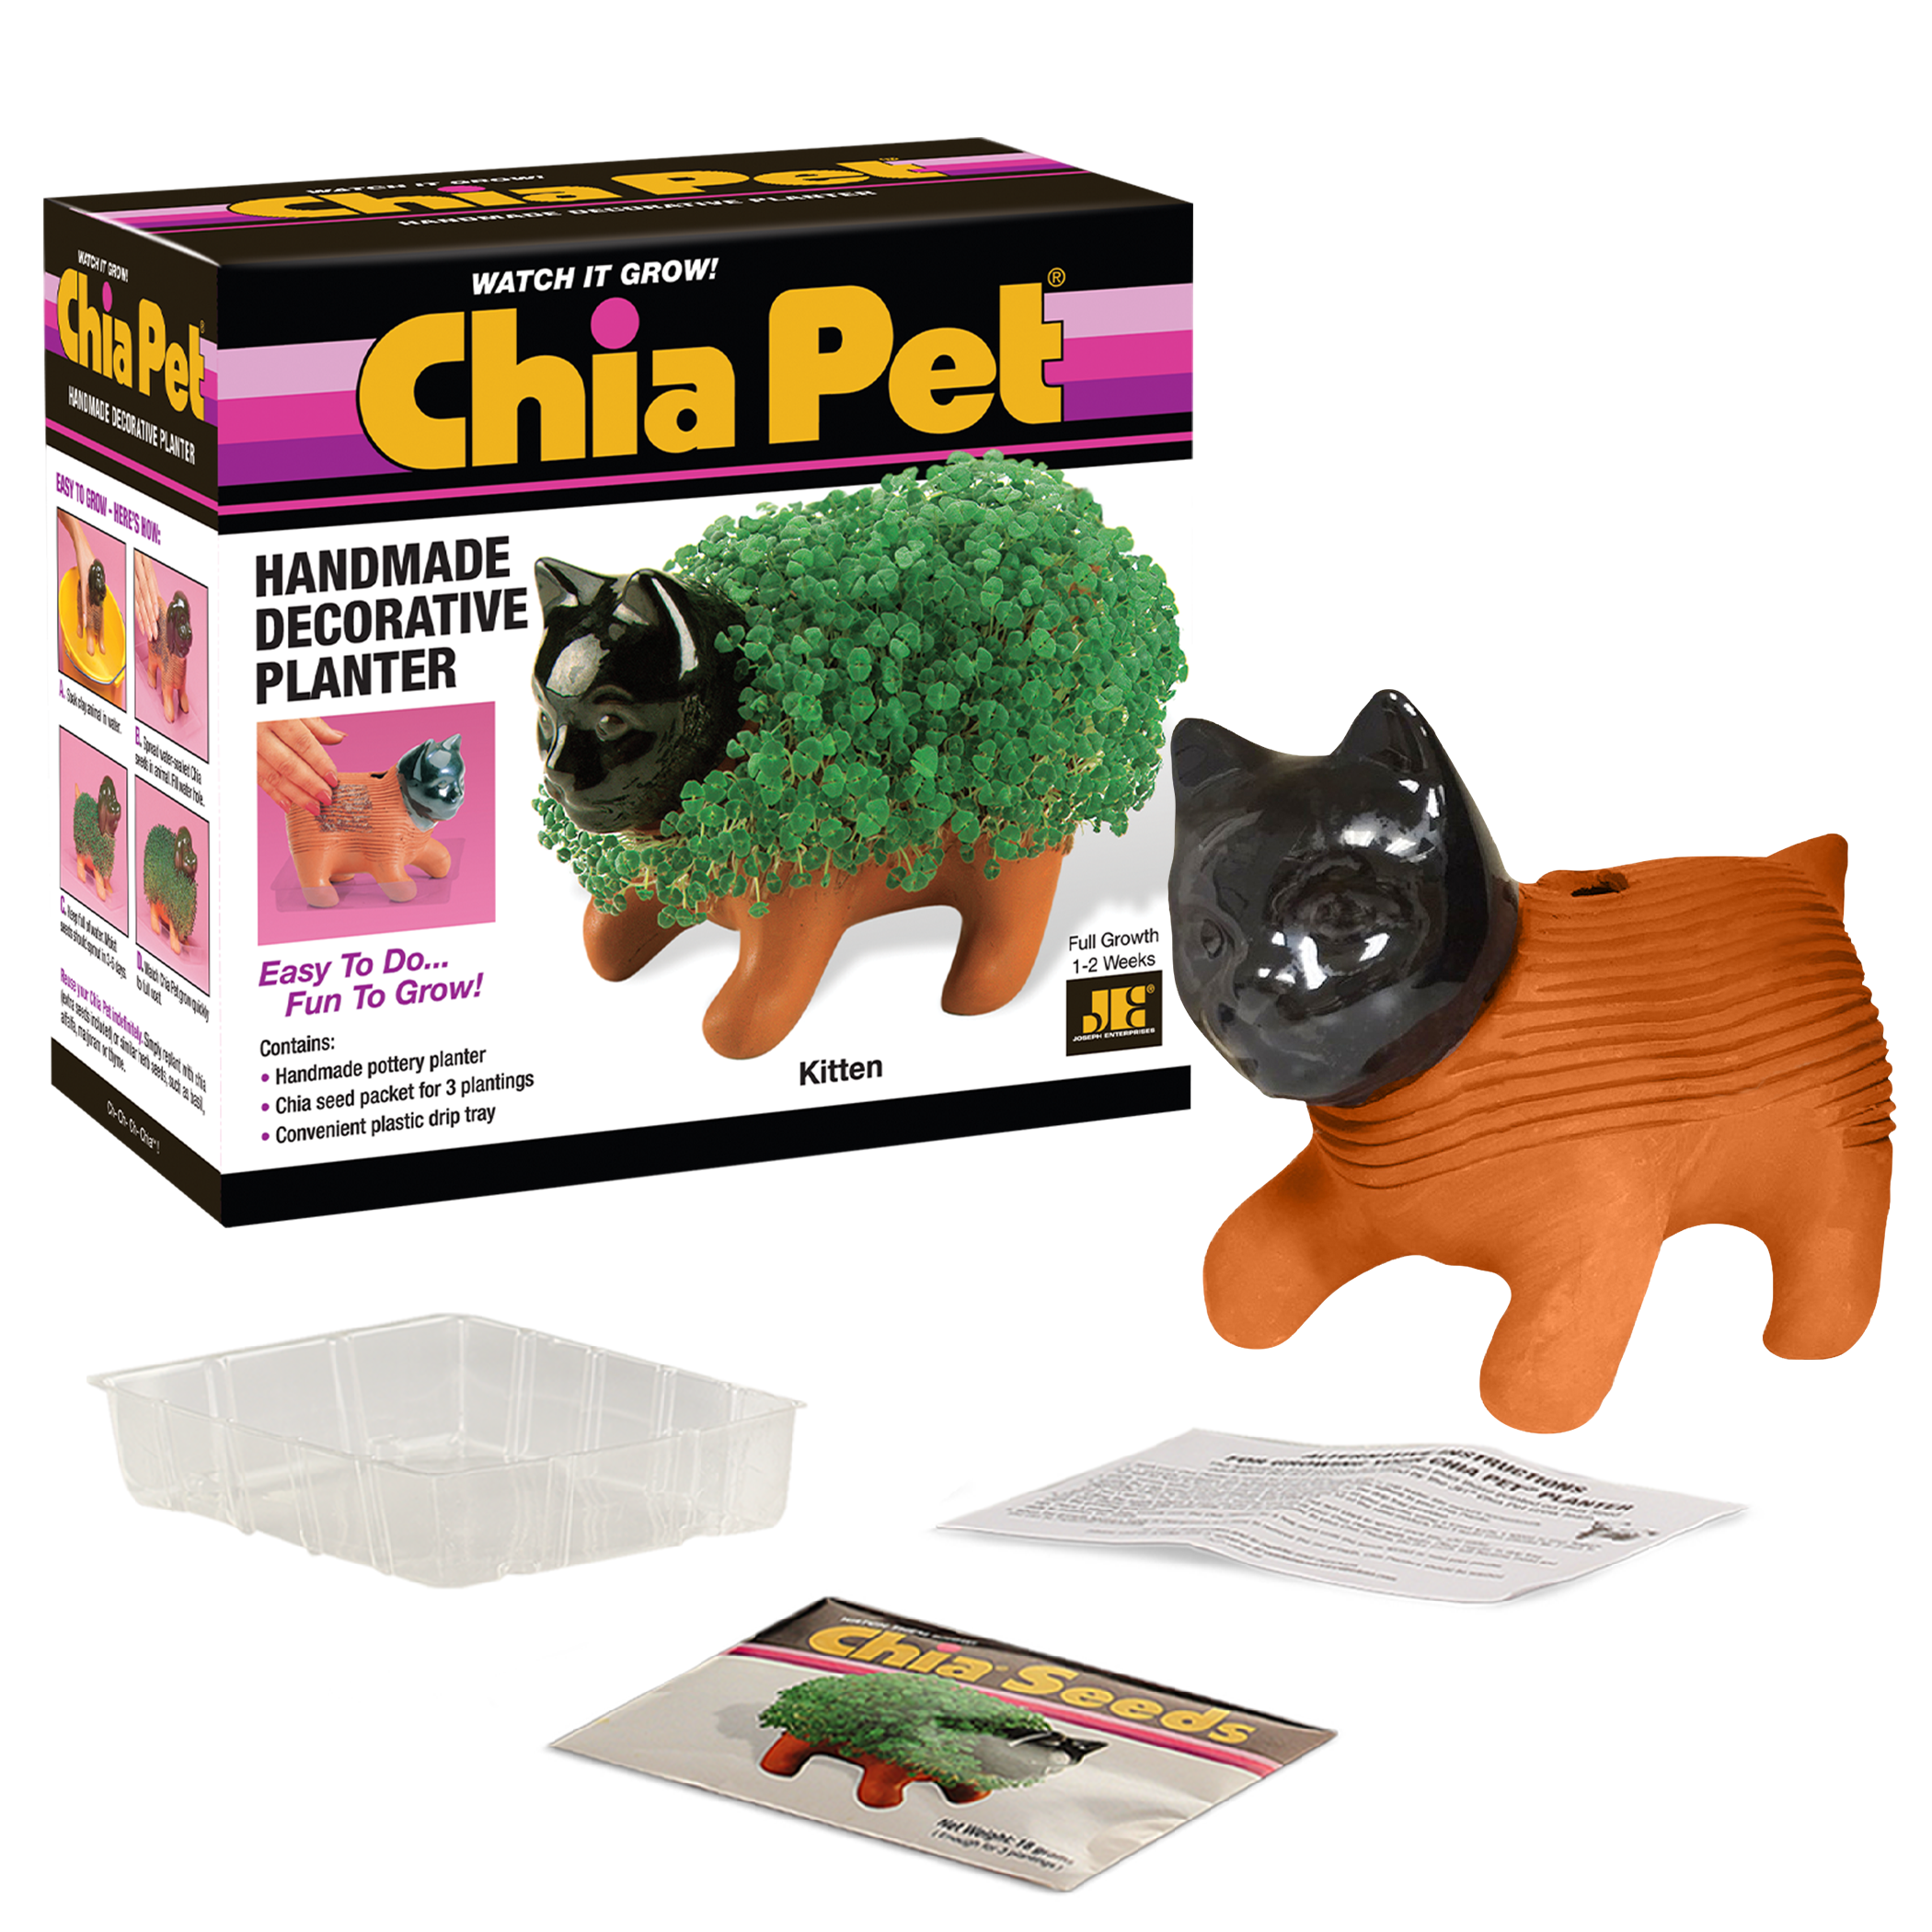 Original Kitten Chia Pet® with box, drip tray, seed packet, and instructions